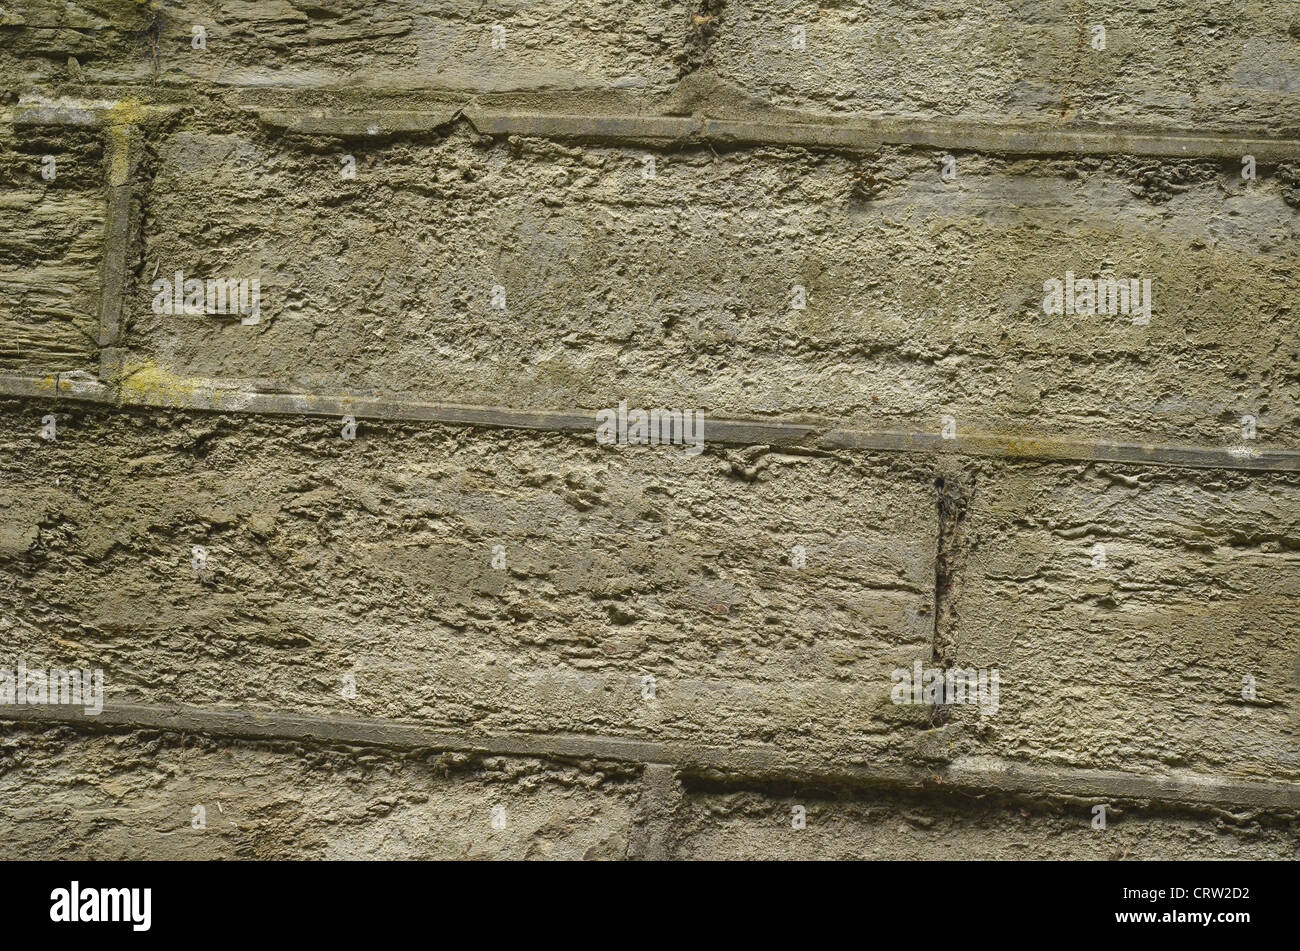 Detail of section of stone wall. Visual allegory for 'firewall' or file 'access denied'. Stock Photo